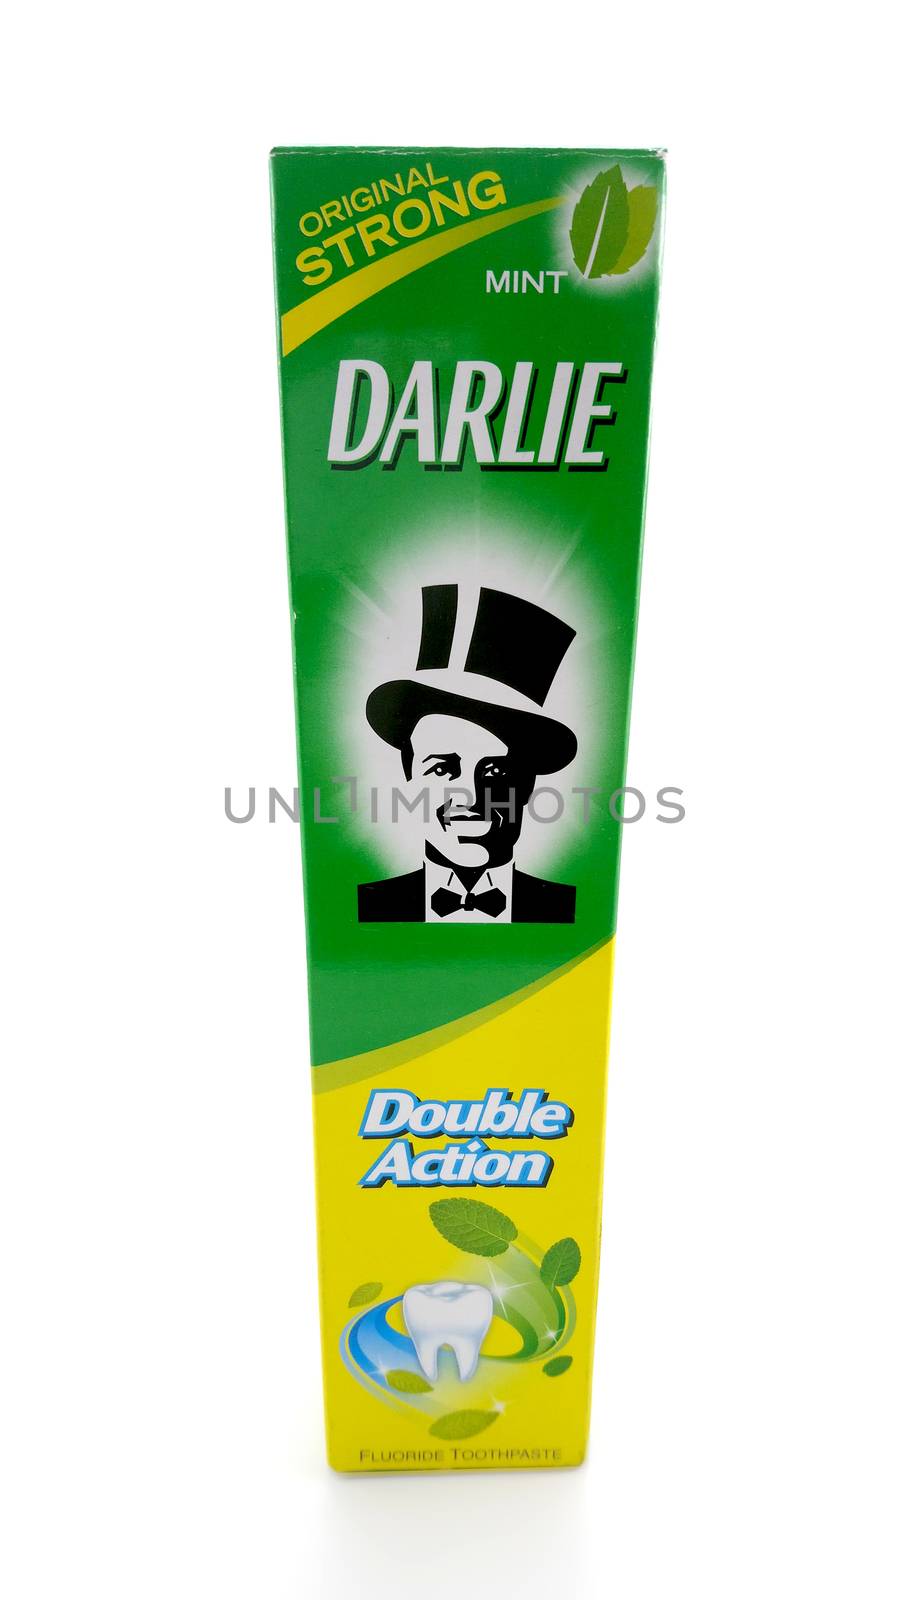 Darlie mint original strong toothpaste in Manila, Philippines by imwaltersy